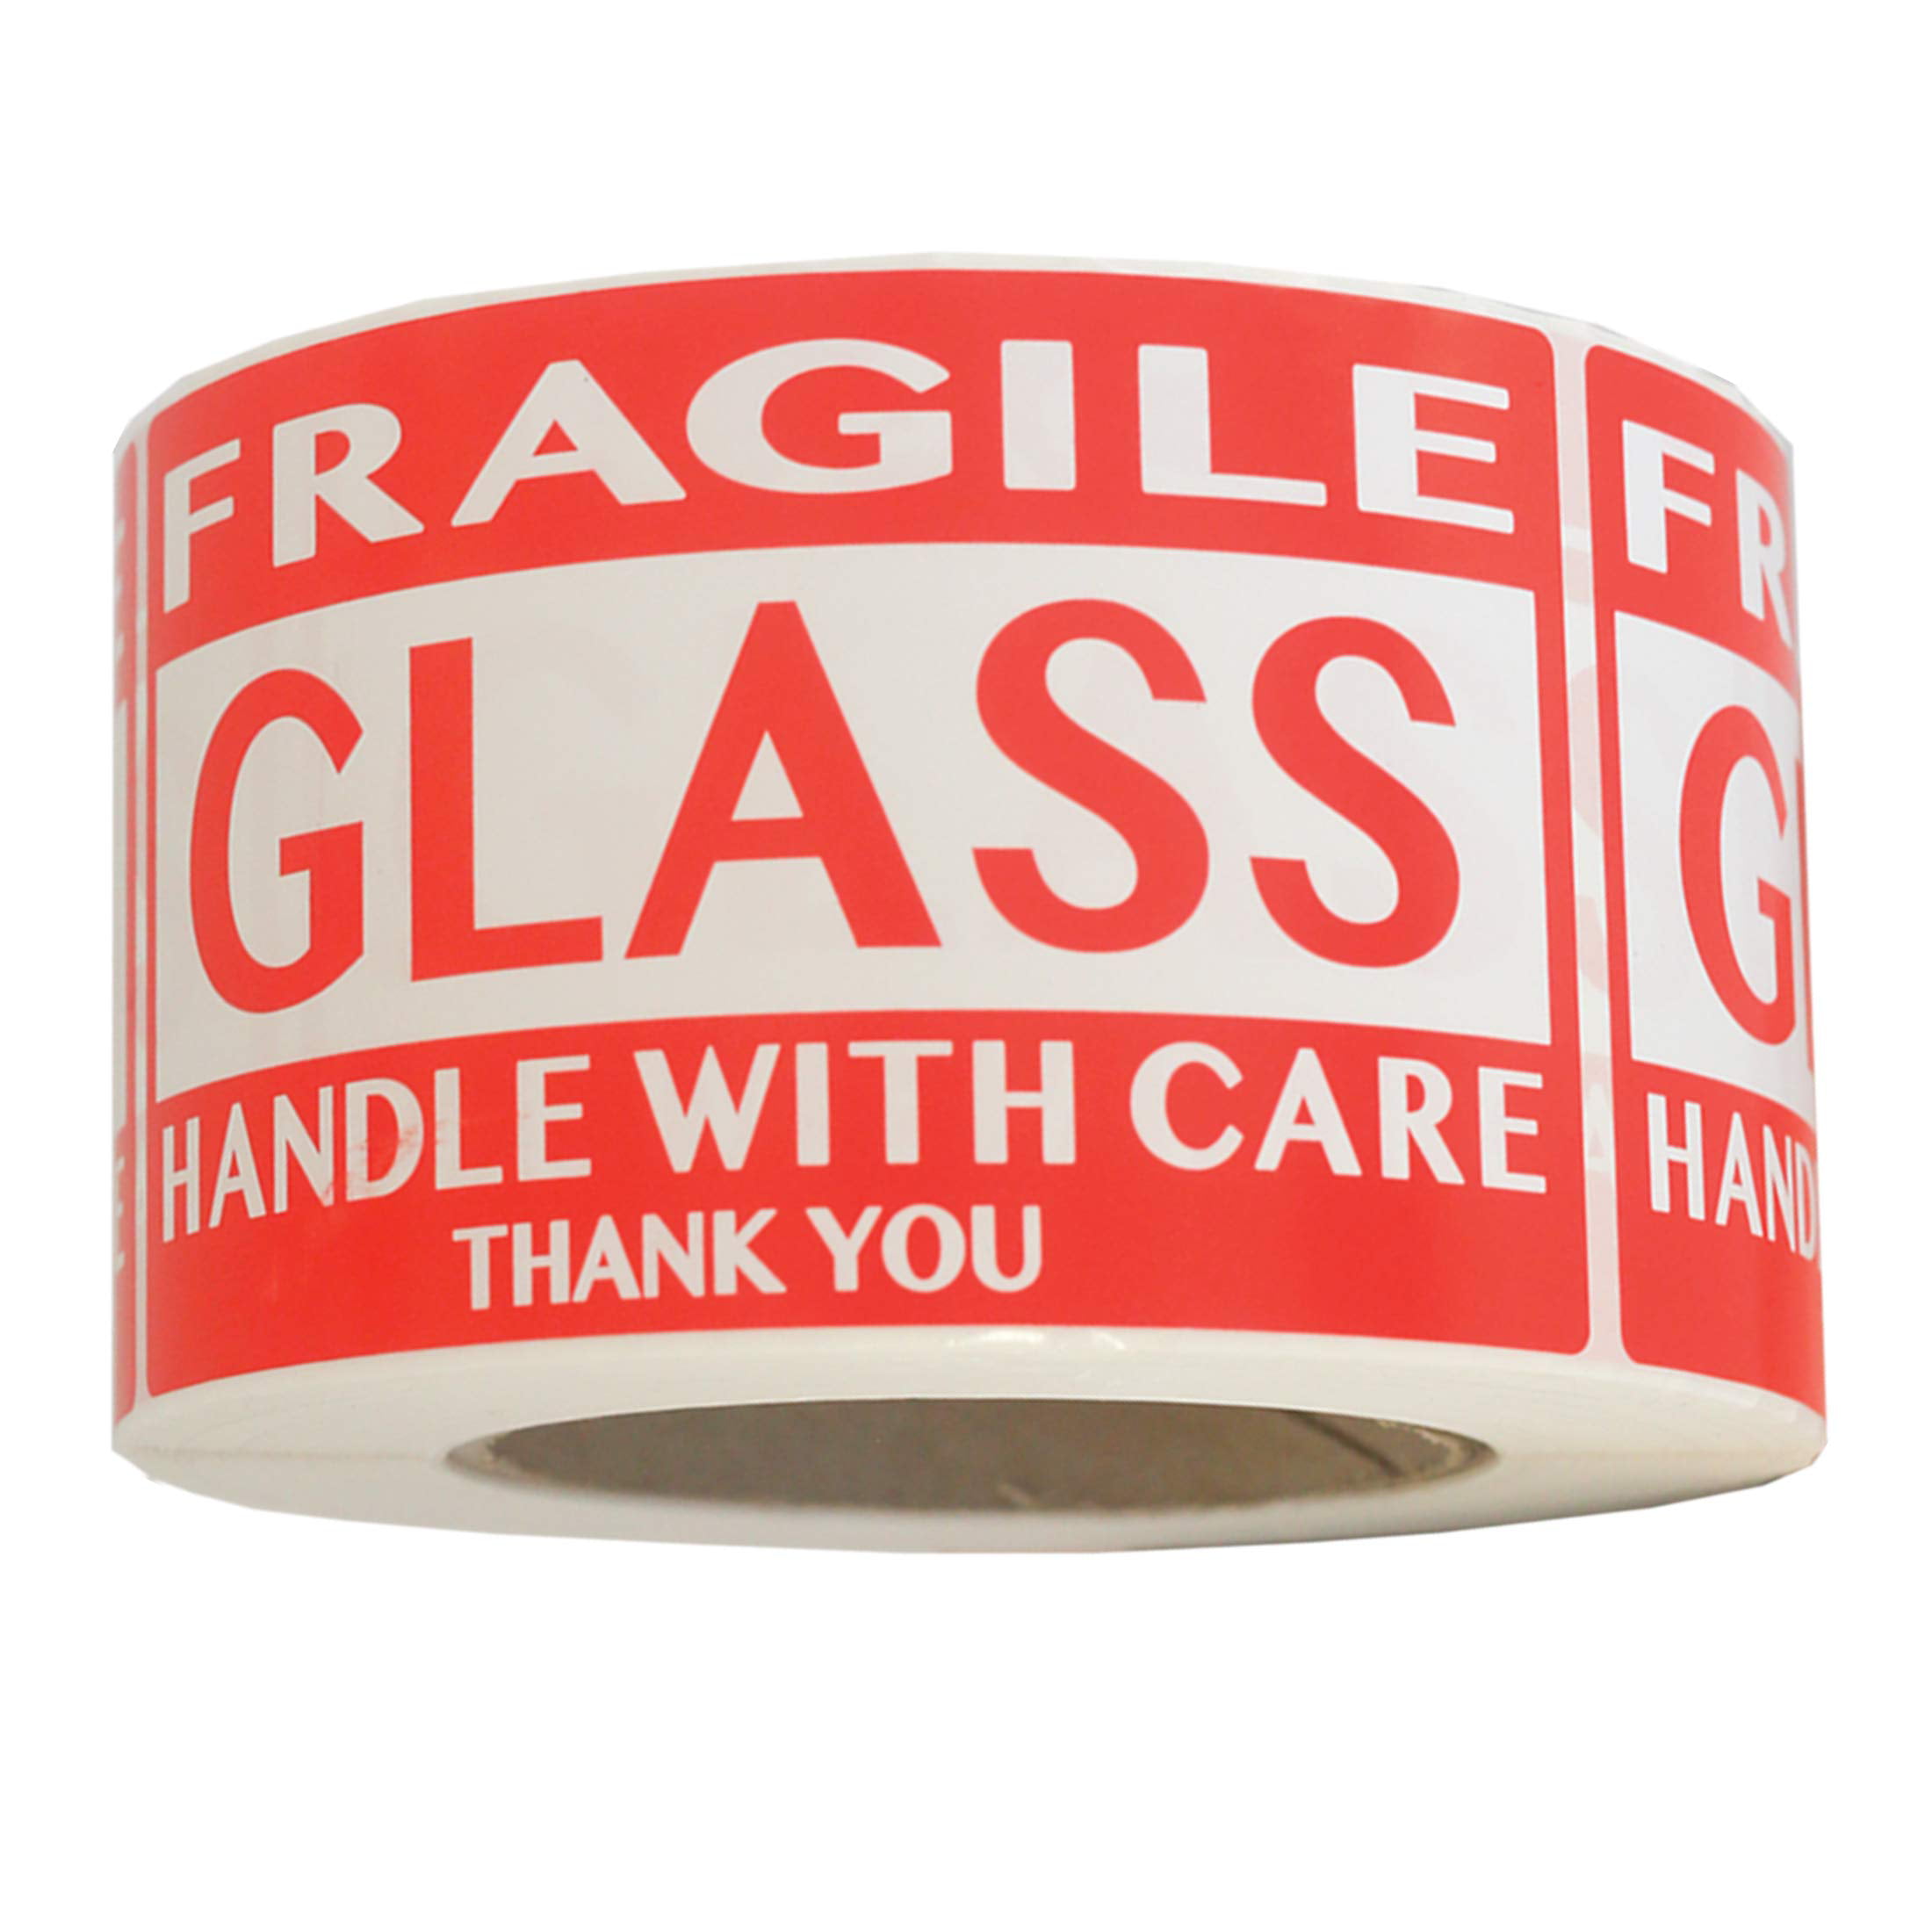 2"x3" HANDLE WITH CARE Stickers Labels Value Set FRAGILE HEAVY 1"x3", 2"x3" 